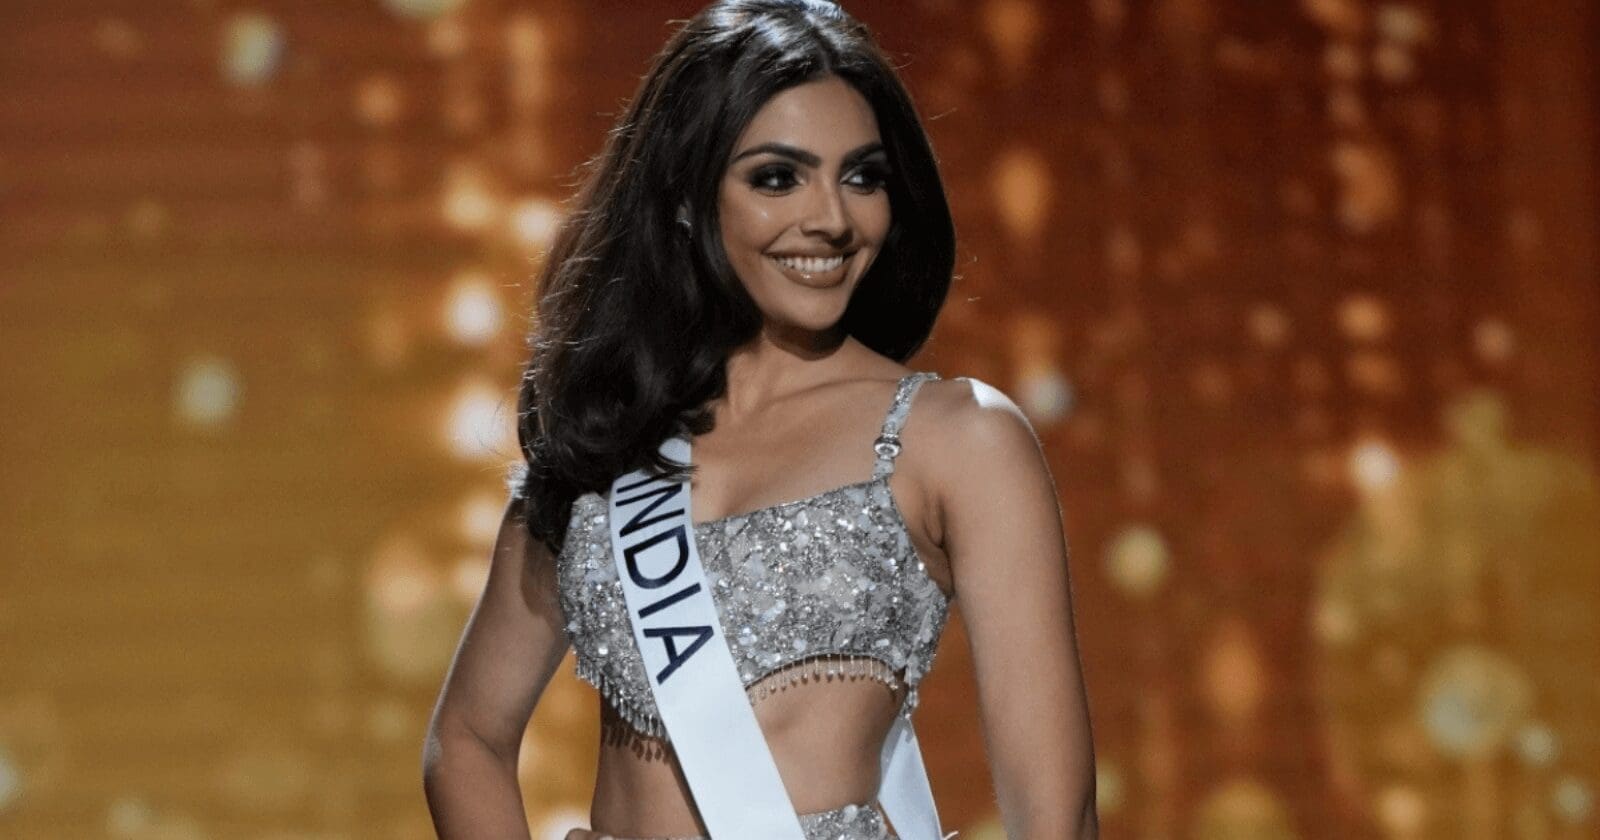 miss-universe-2023-meet-23-year-old-shweta-sharda-who-is-the-face-of-india-an-unforgettable-night-of-beauty-and-talent